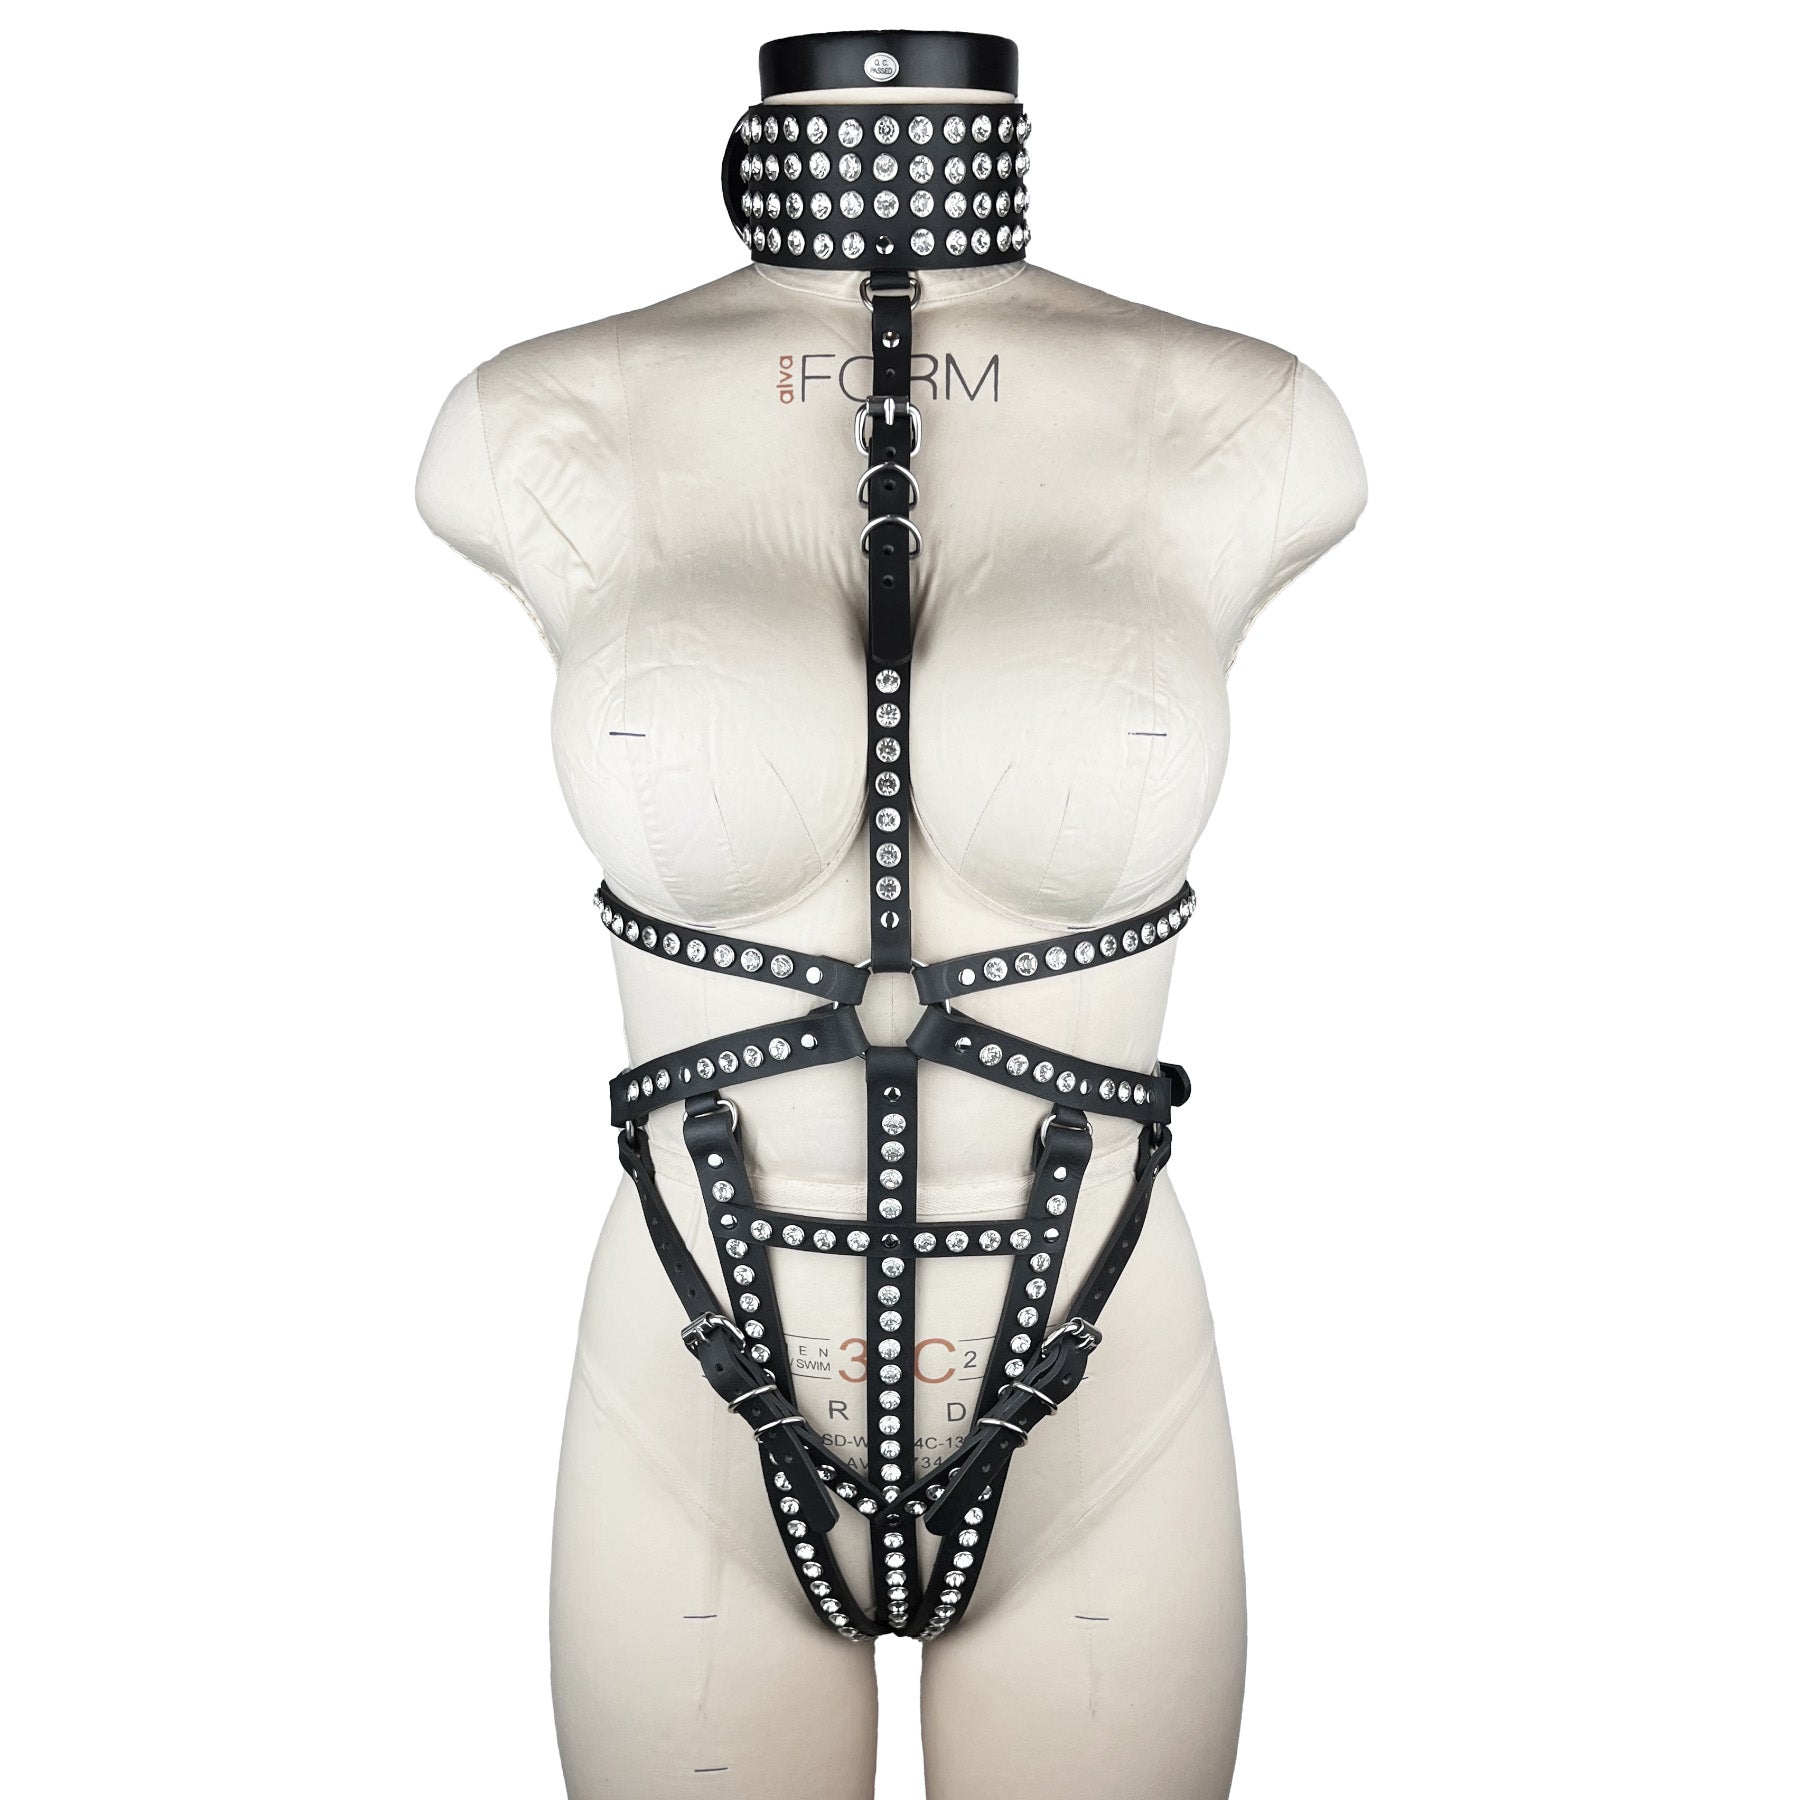 luxury Italian leather and crystals fashion and fetish body harness, bespoke, made-to-order in nyc, front view